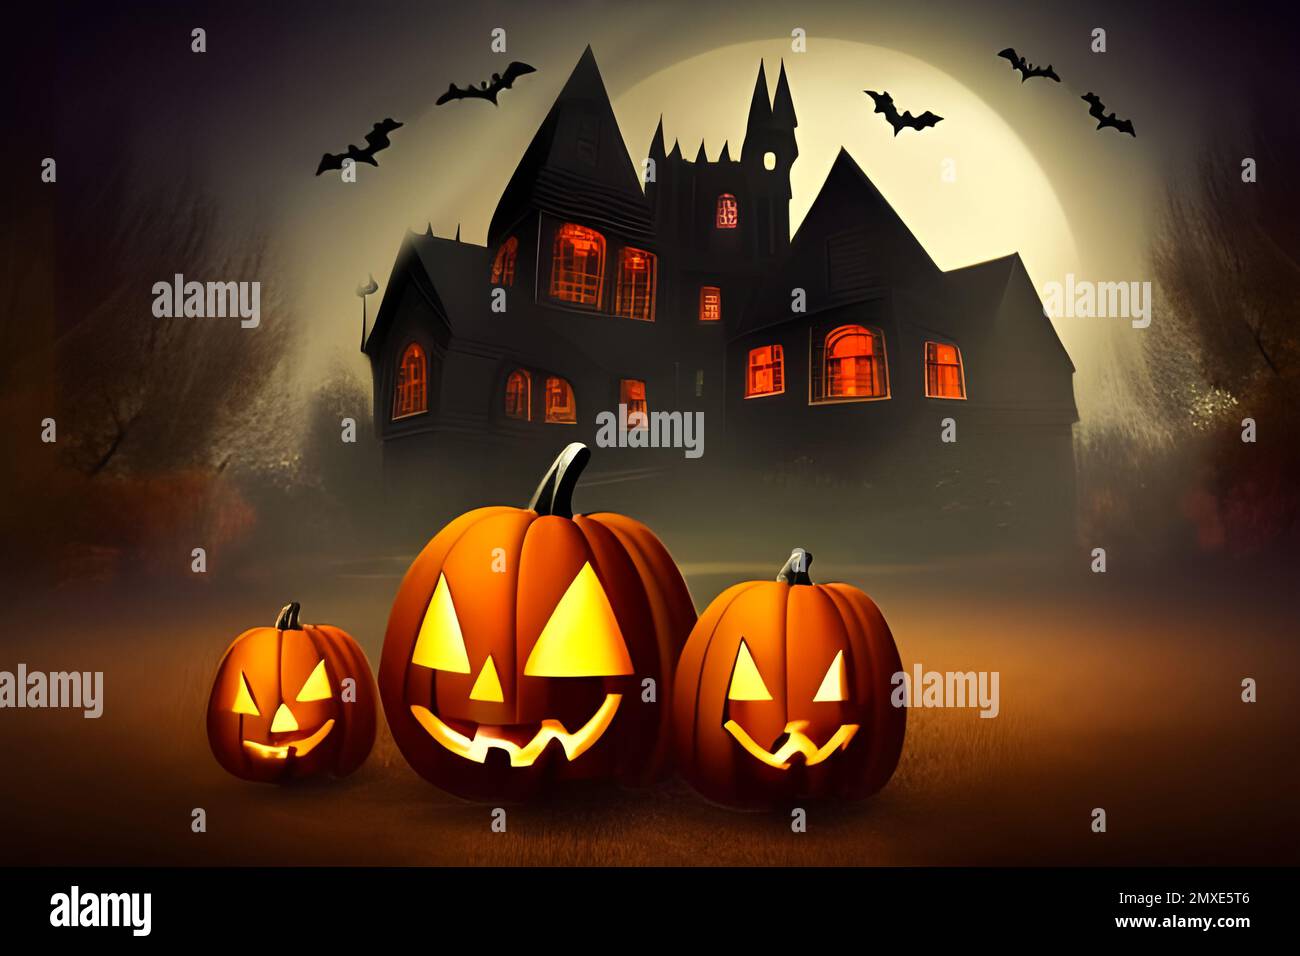 Halloween background with pumpkins and haunted mansion. Stock Photo